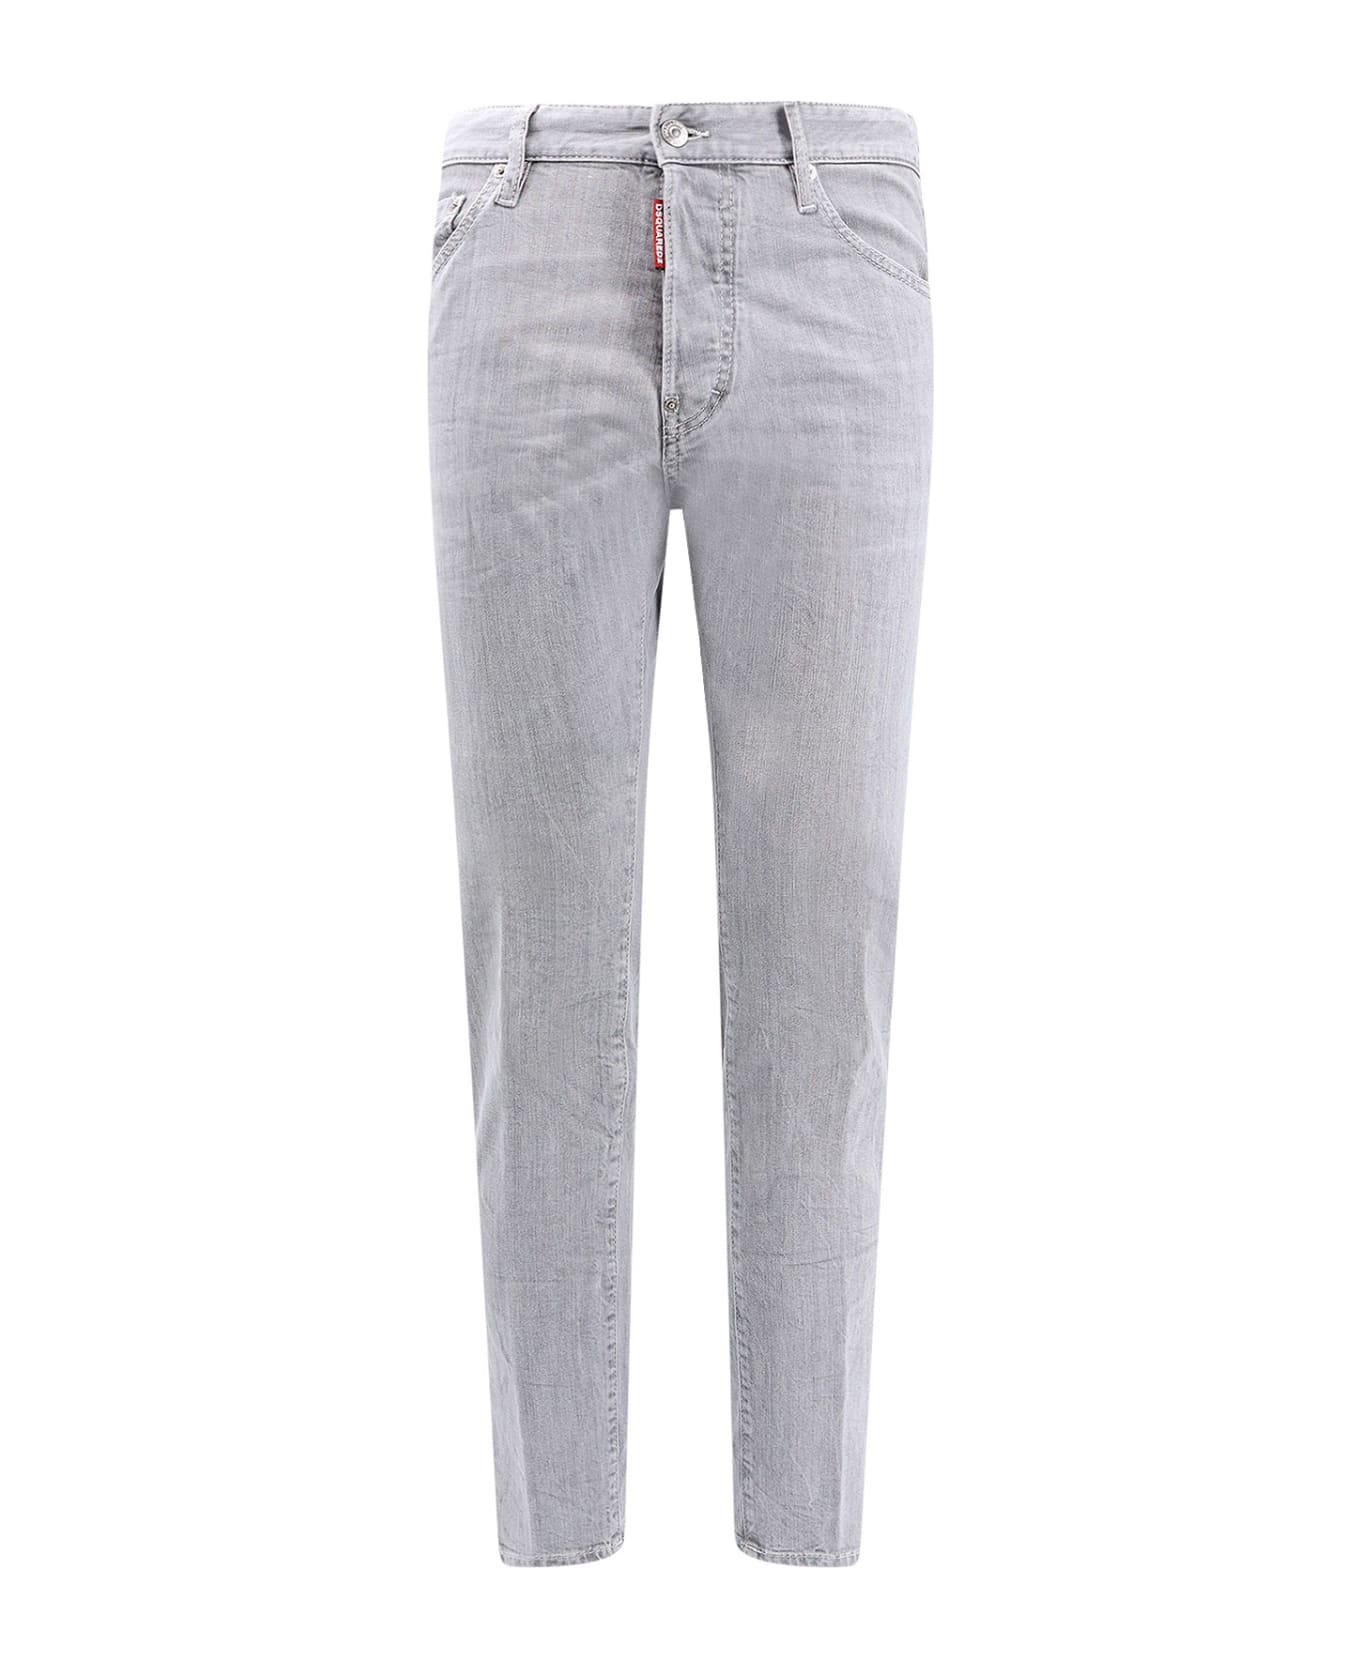 Dsquared2 Cool Guy Jean Trouser - Grey